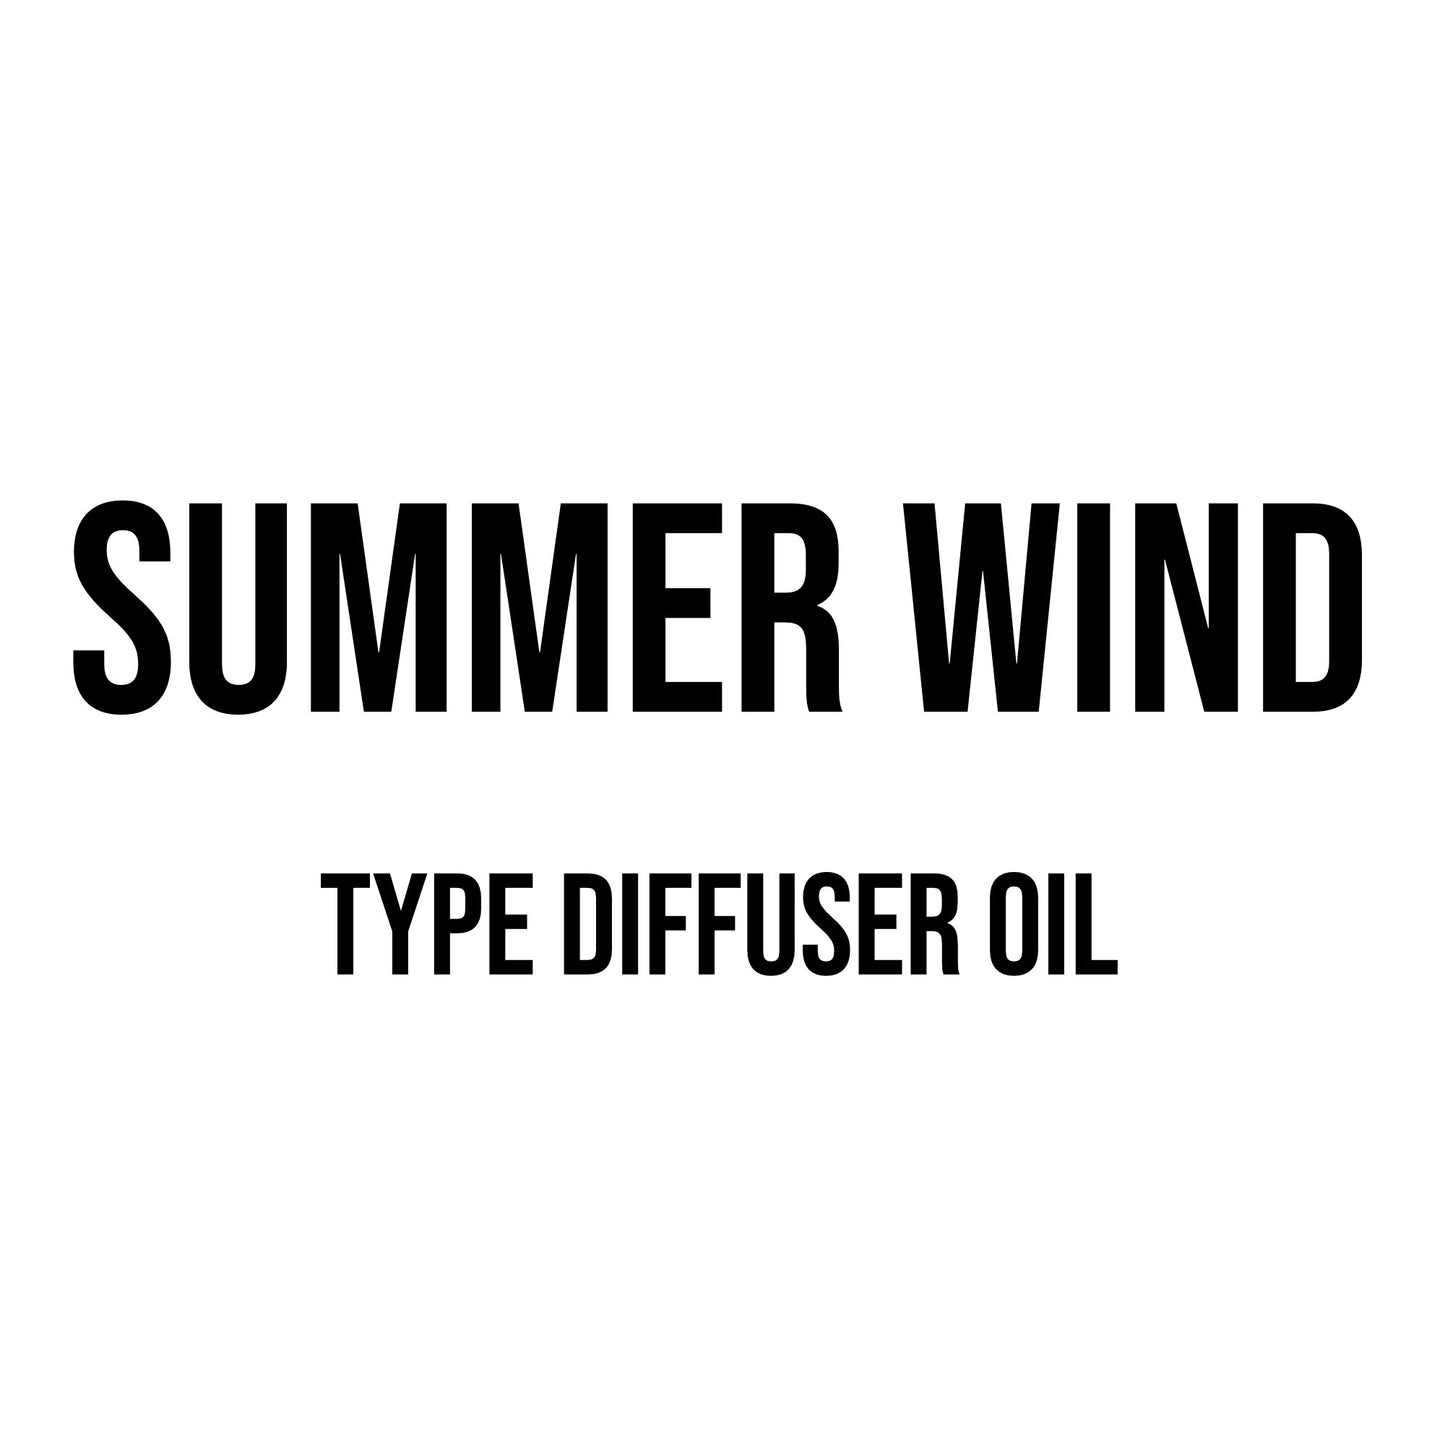 Summer Wind Type Diffuser Oil